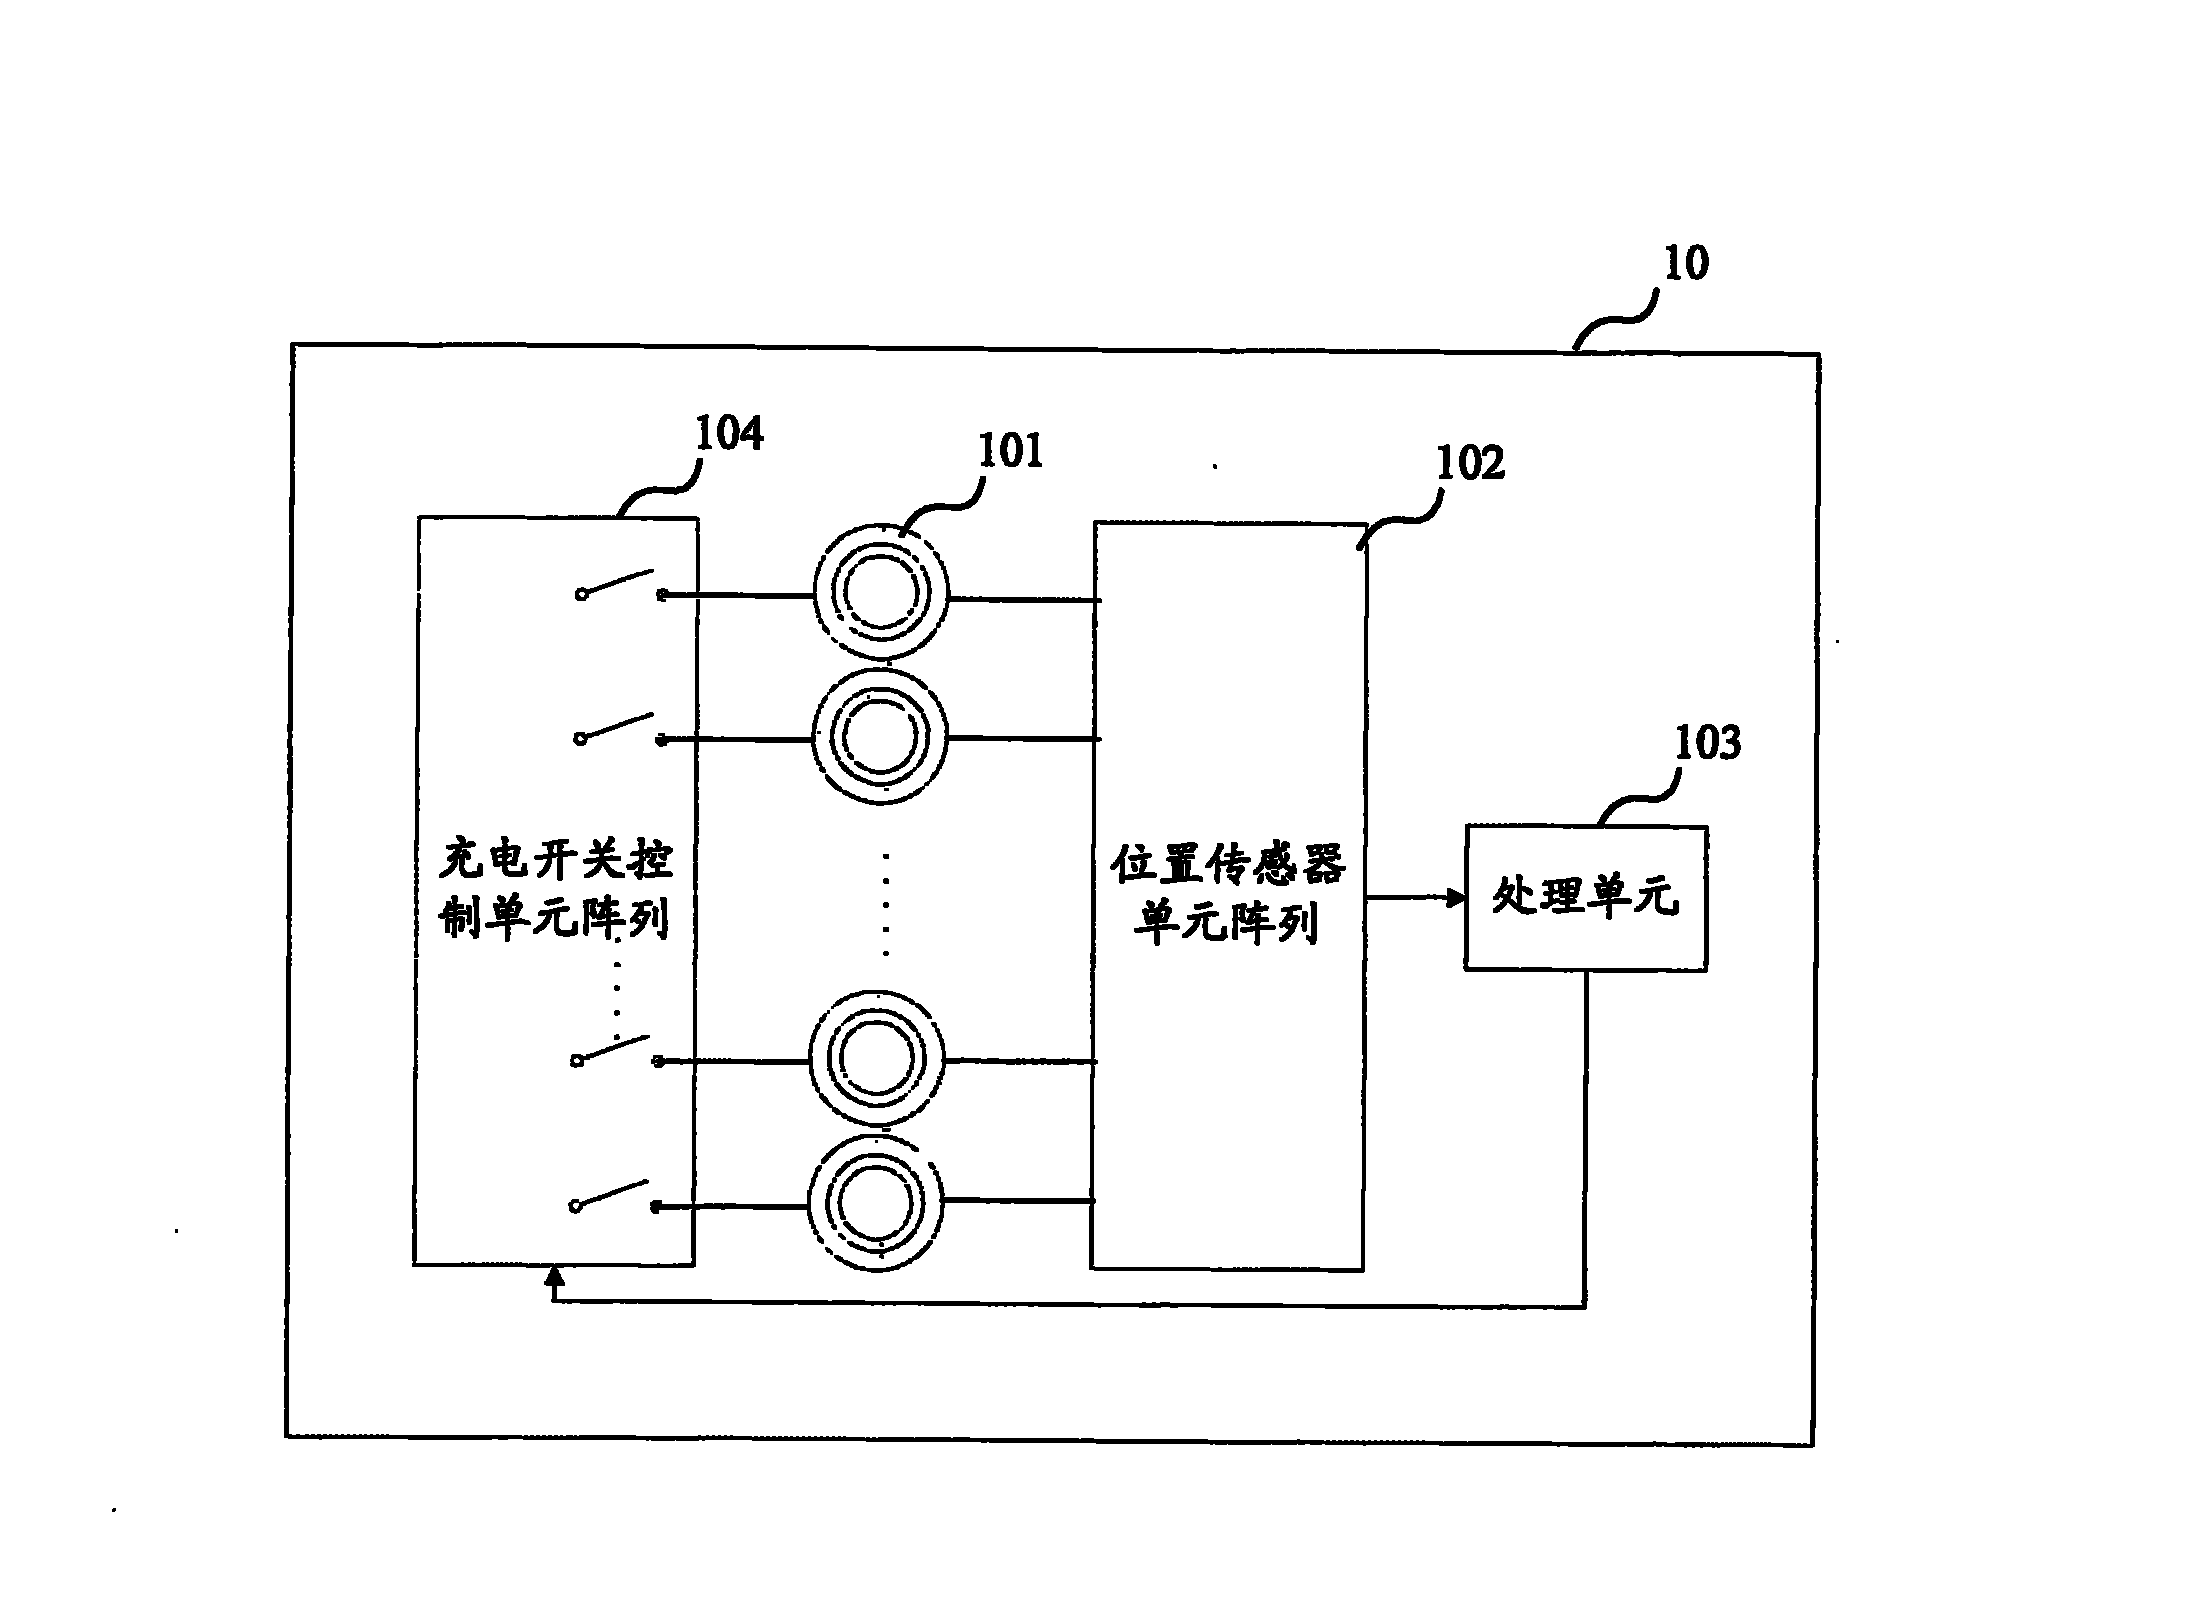 Wireless charging control method and wireless charging device